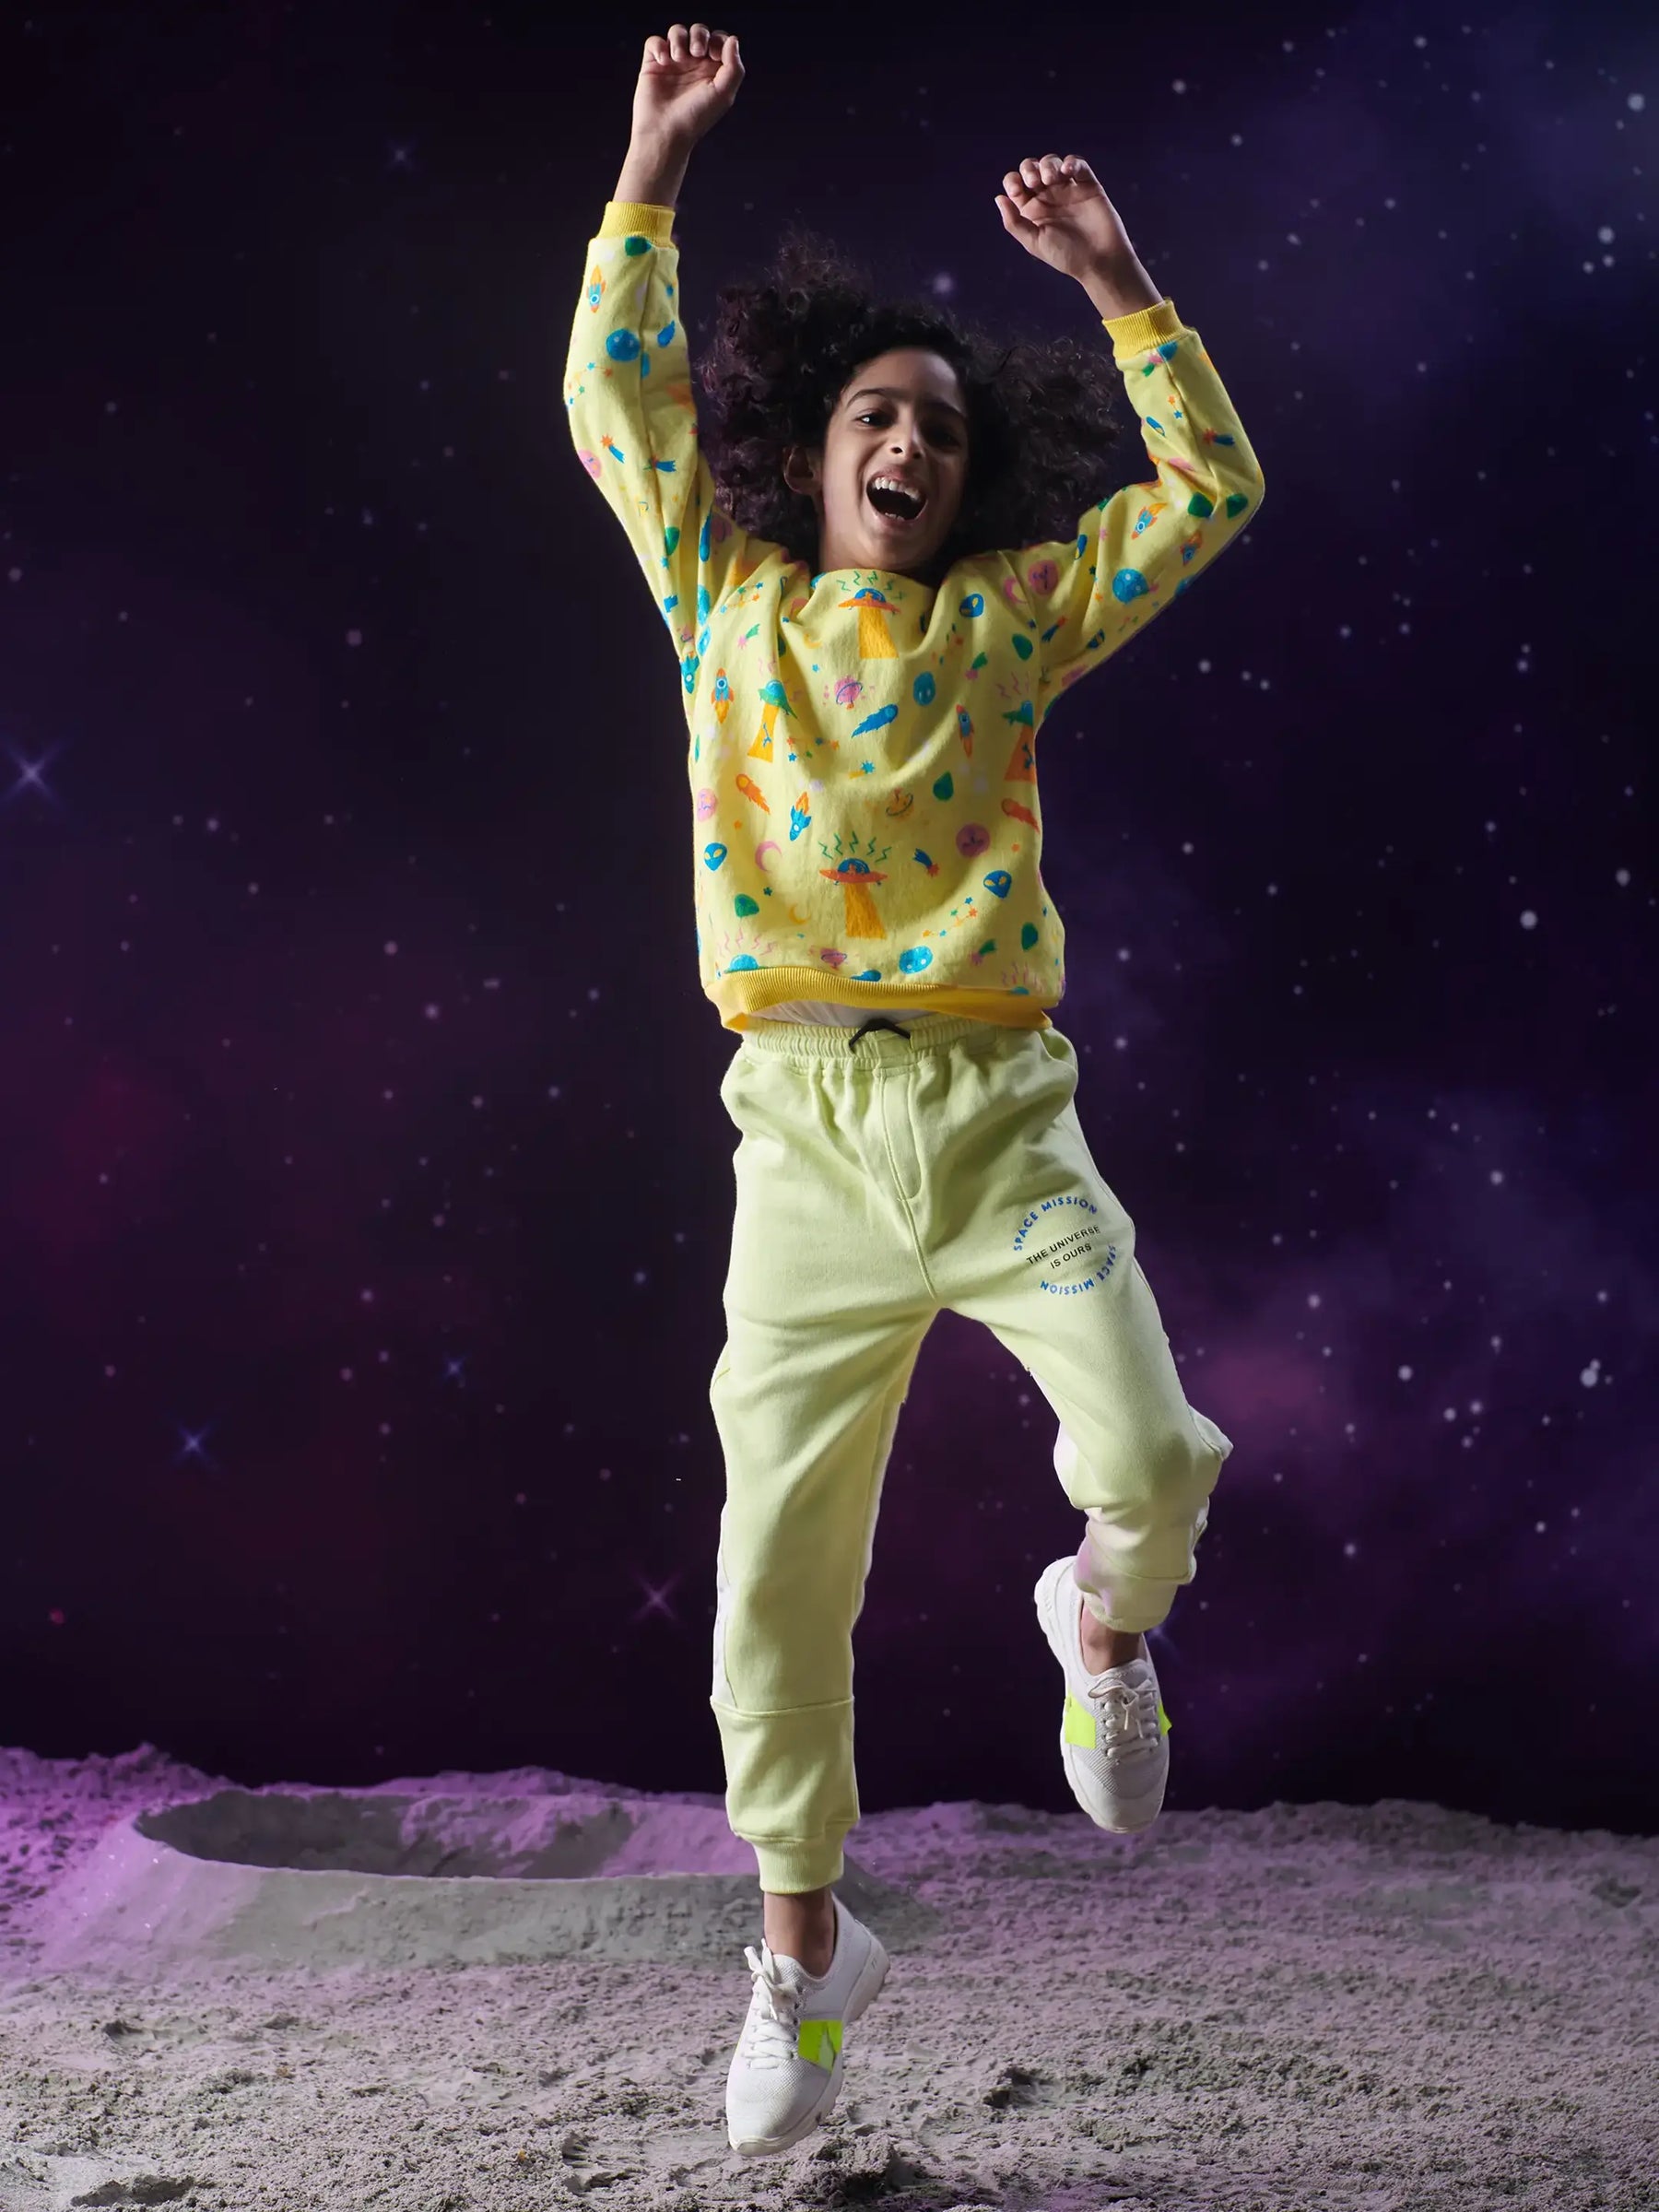 Space Elements Joggers Somersault